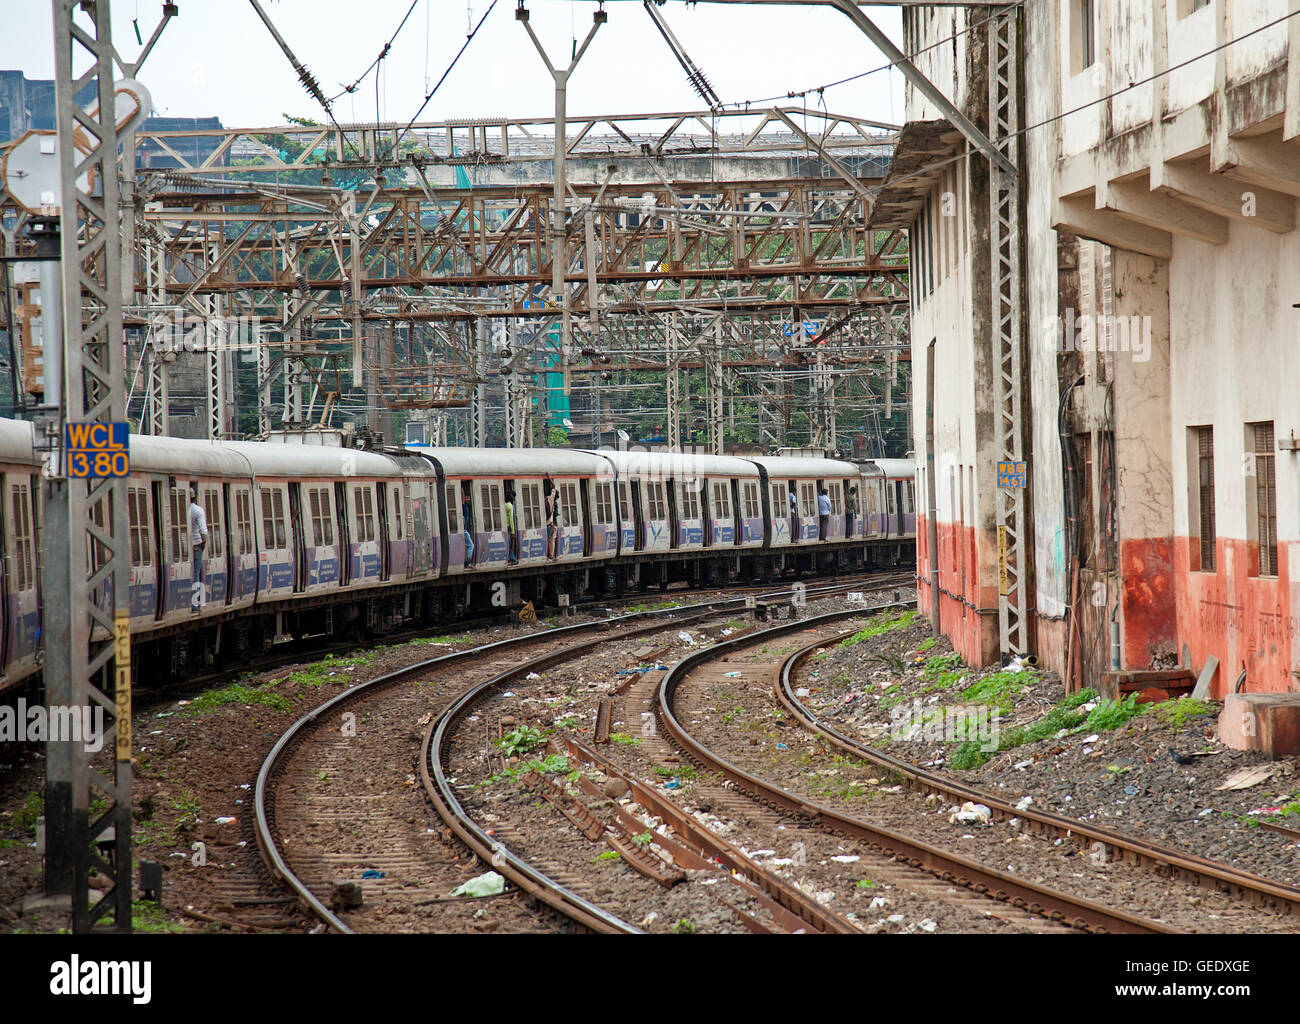 The image of Local Train from CST station building or VT station, Mumbai India Stock Photo